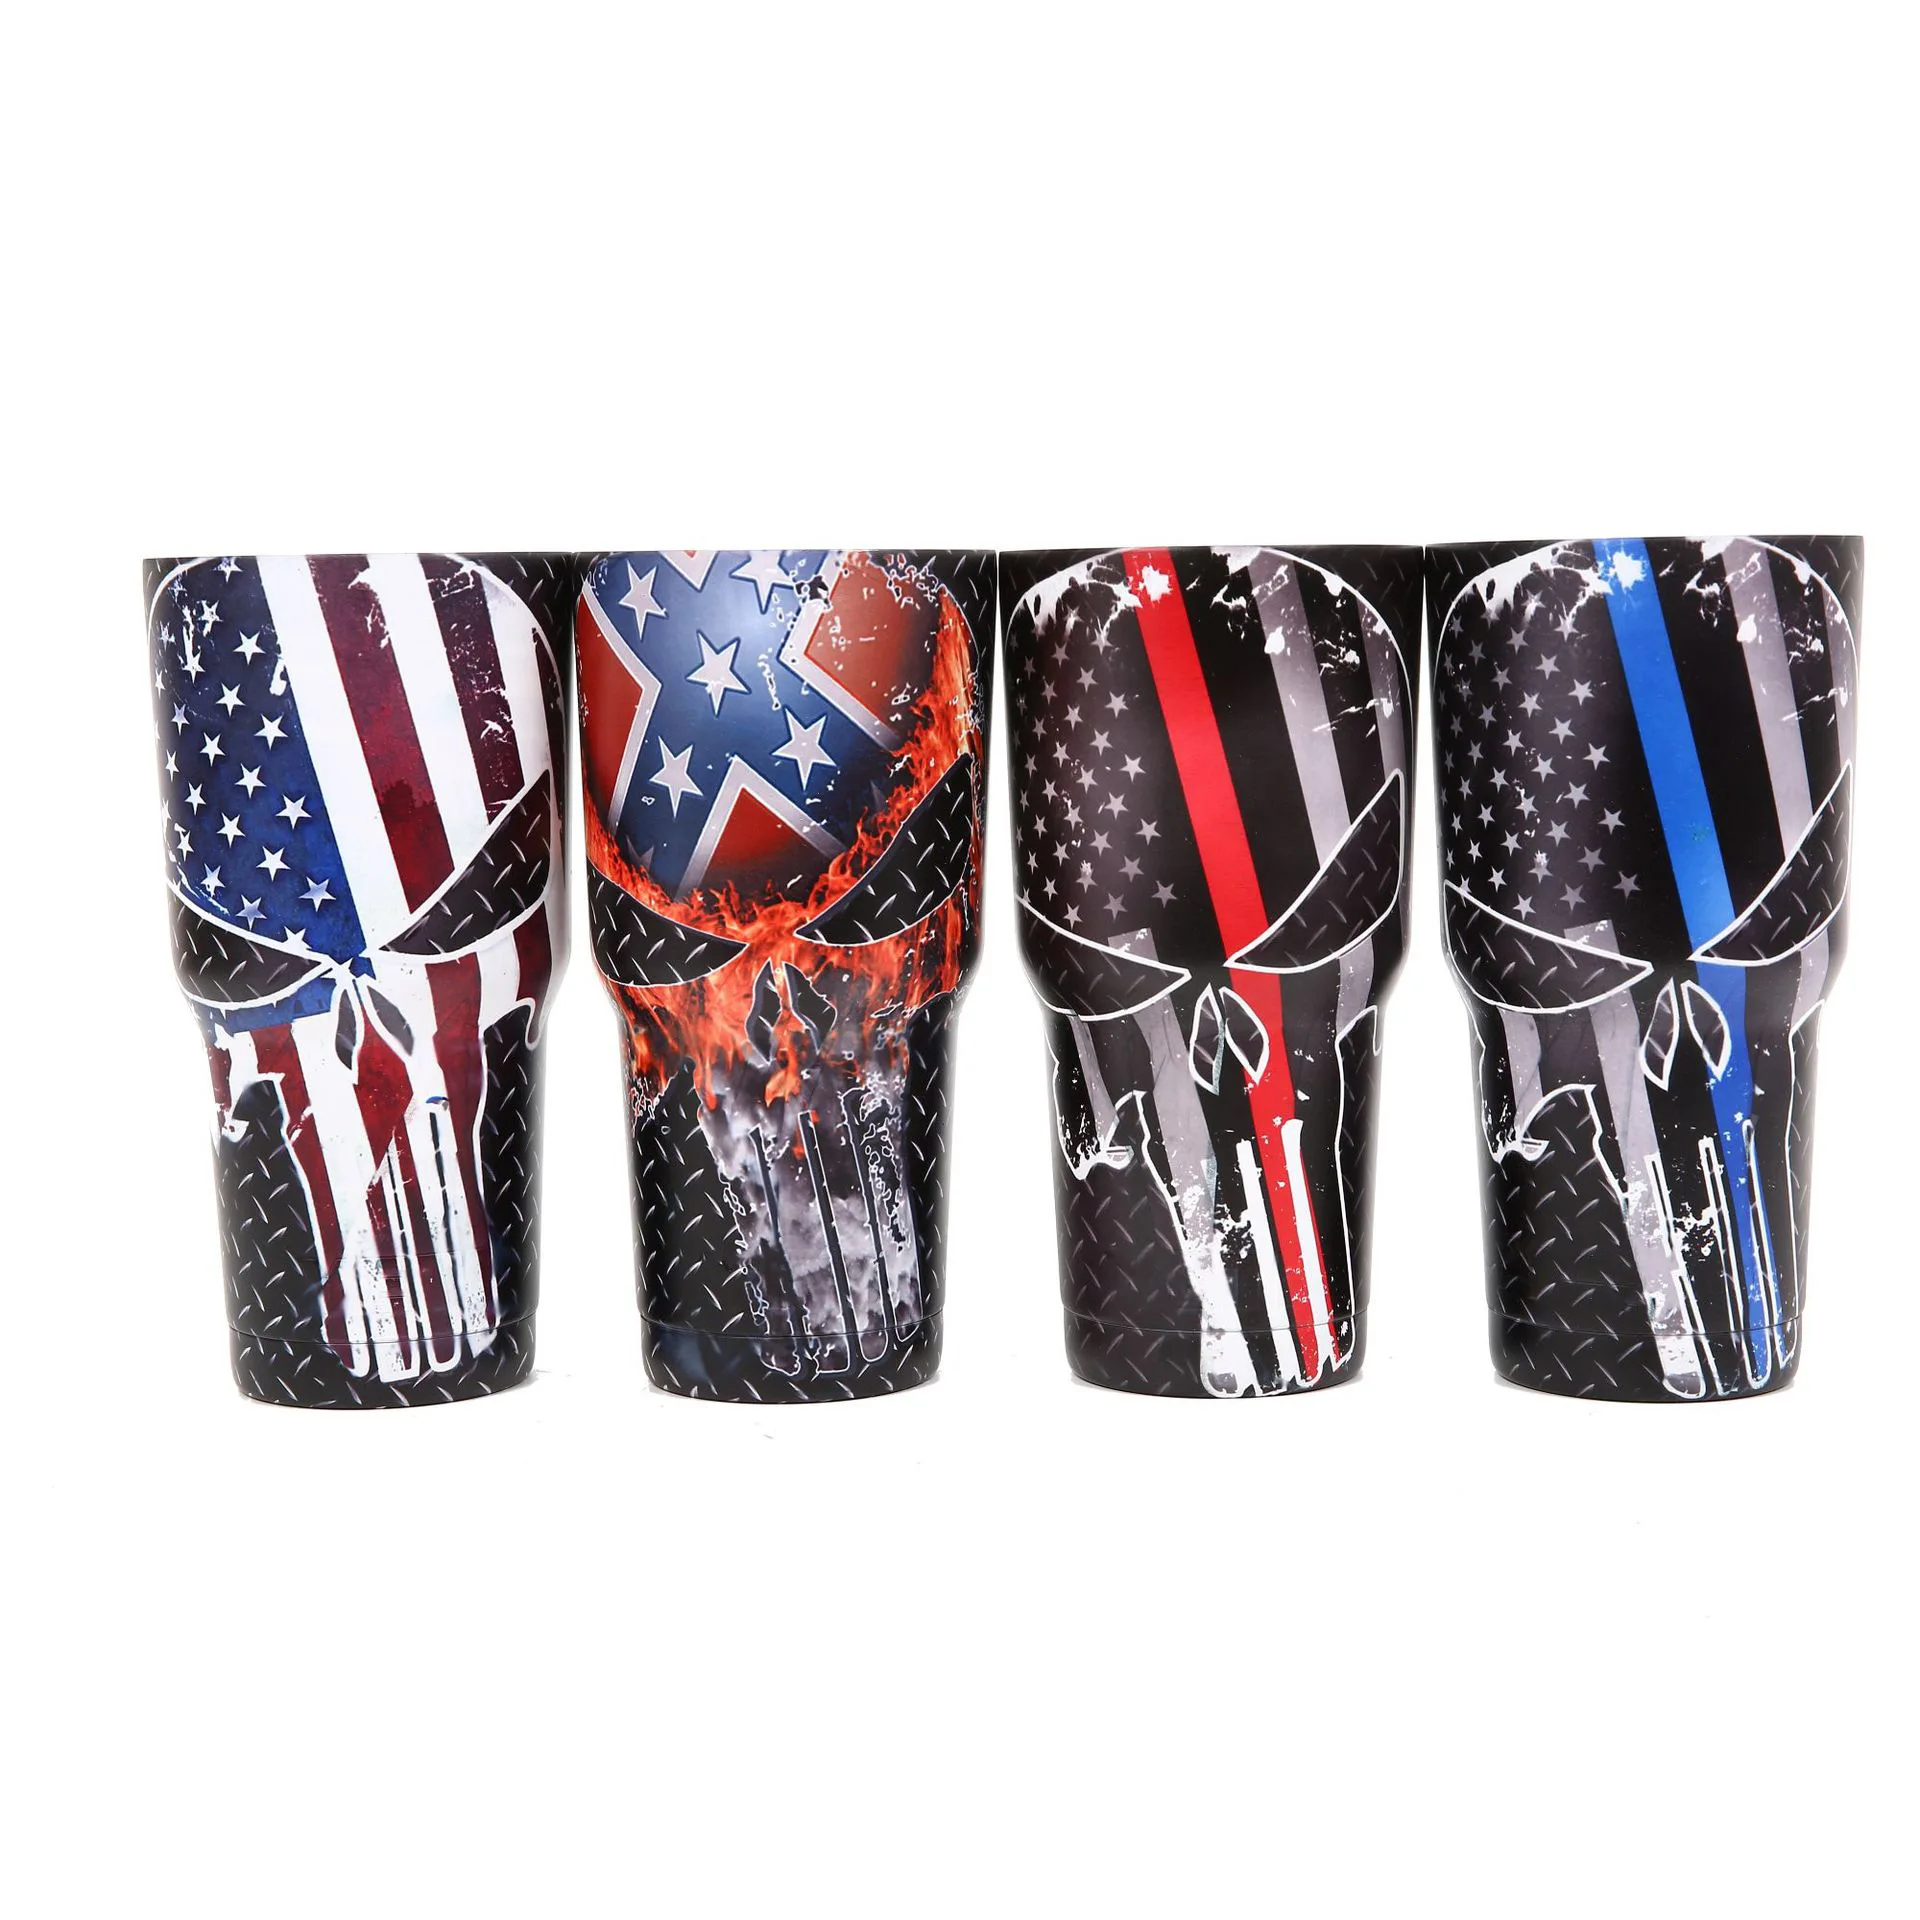 

H464 30oz Big Capacity Outdoor Portable Car Sport Insulated Tumbler Cup Pattern Printed Straight Stainless Steel Water Bottles, Multi colour